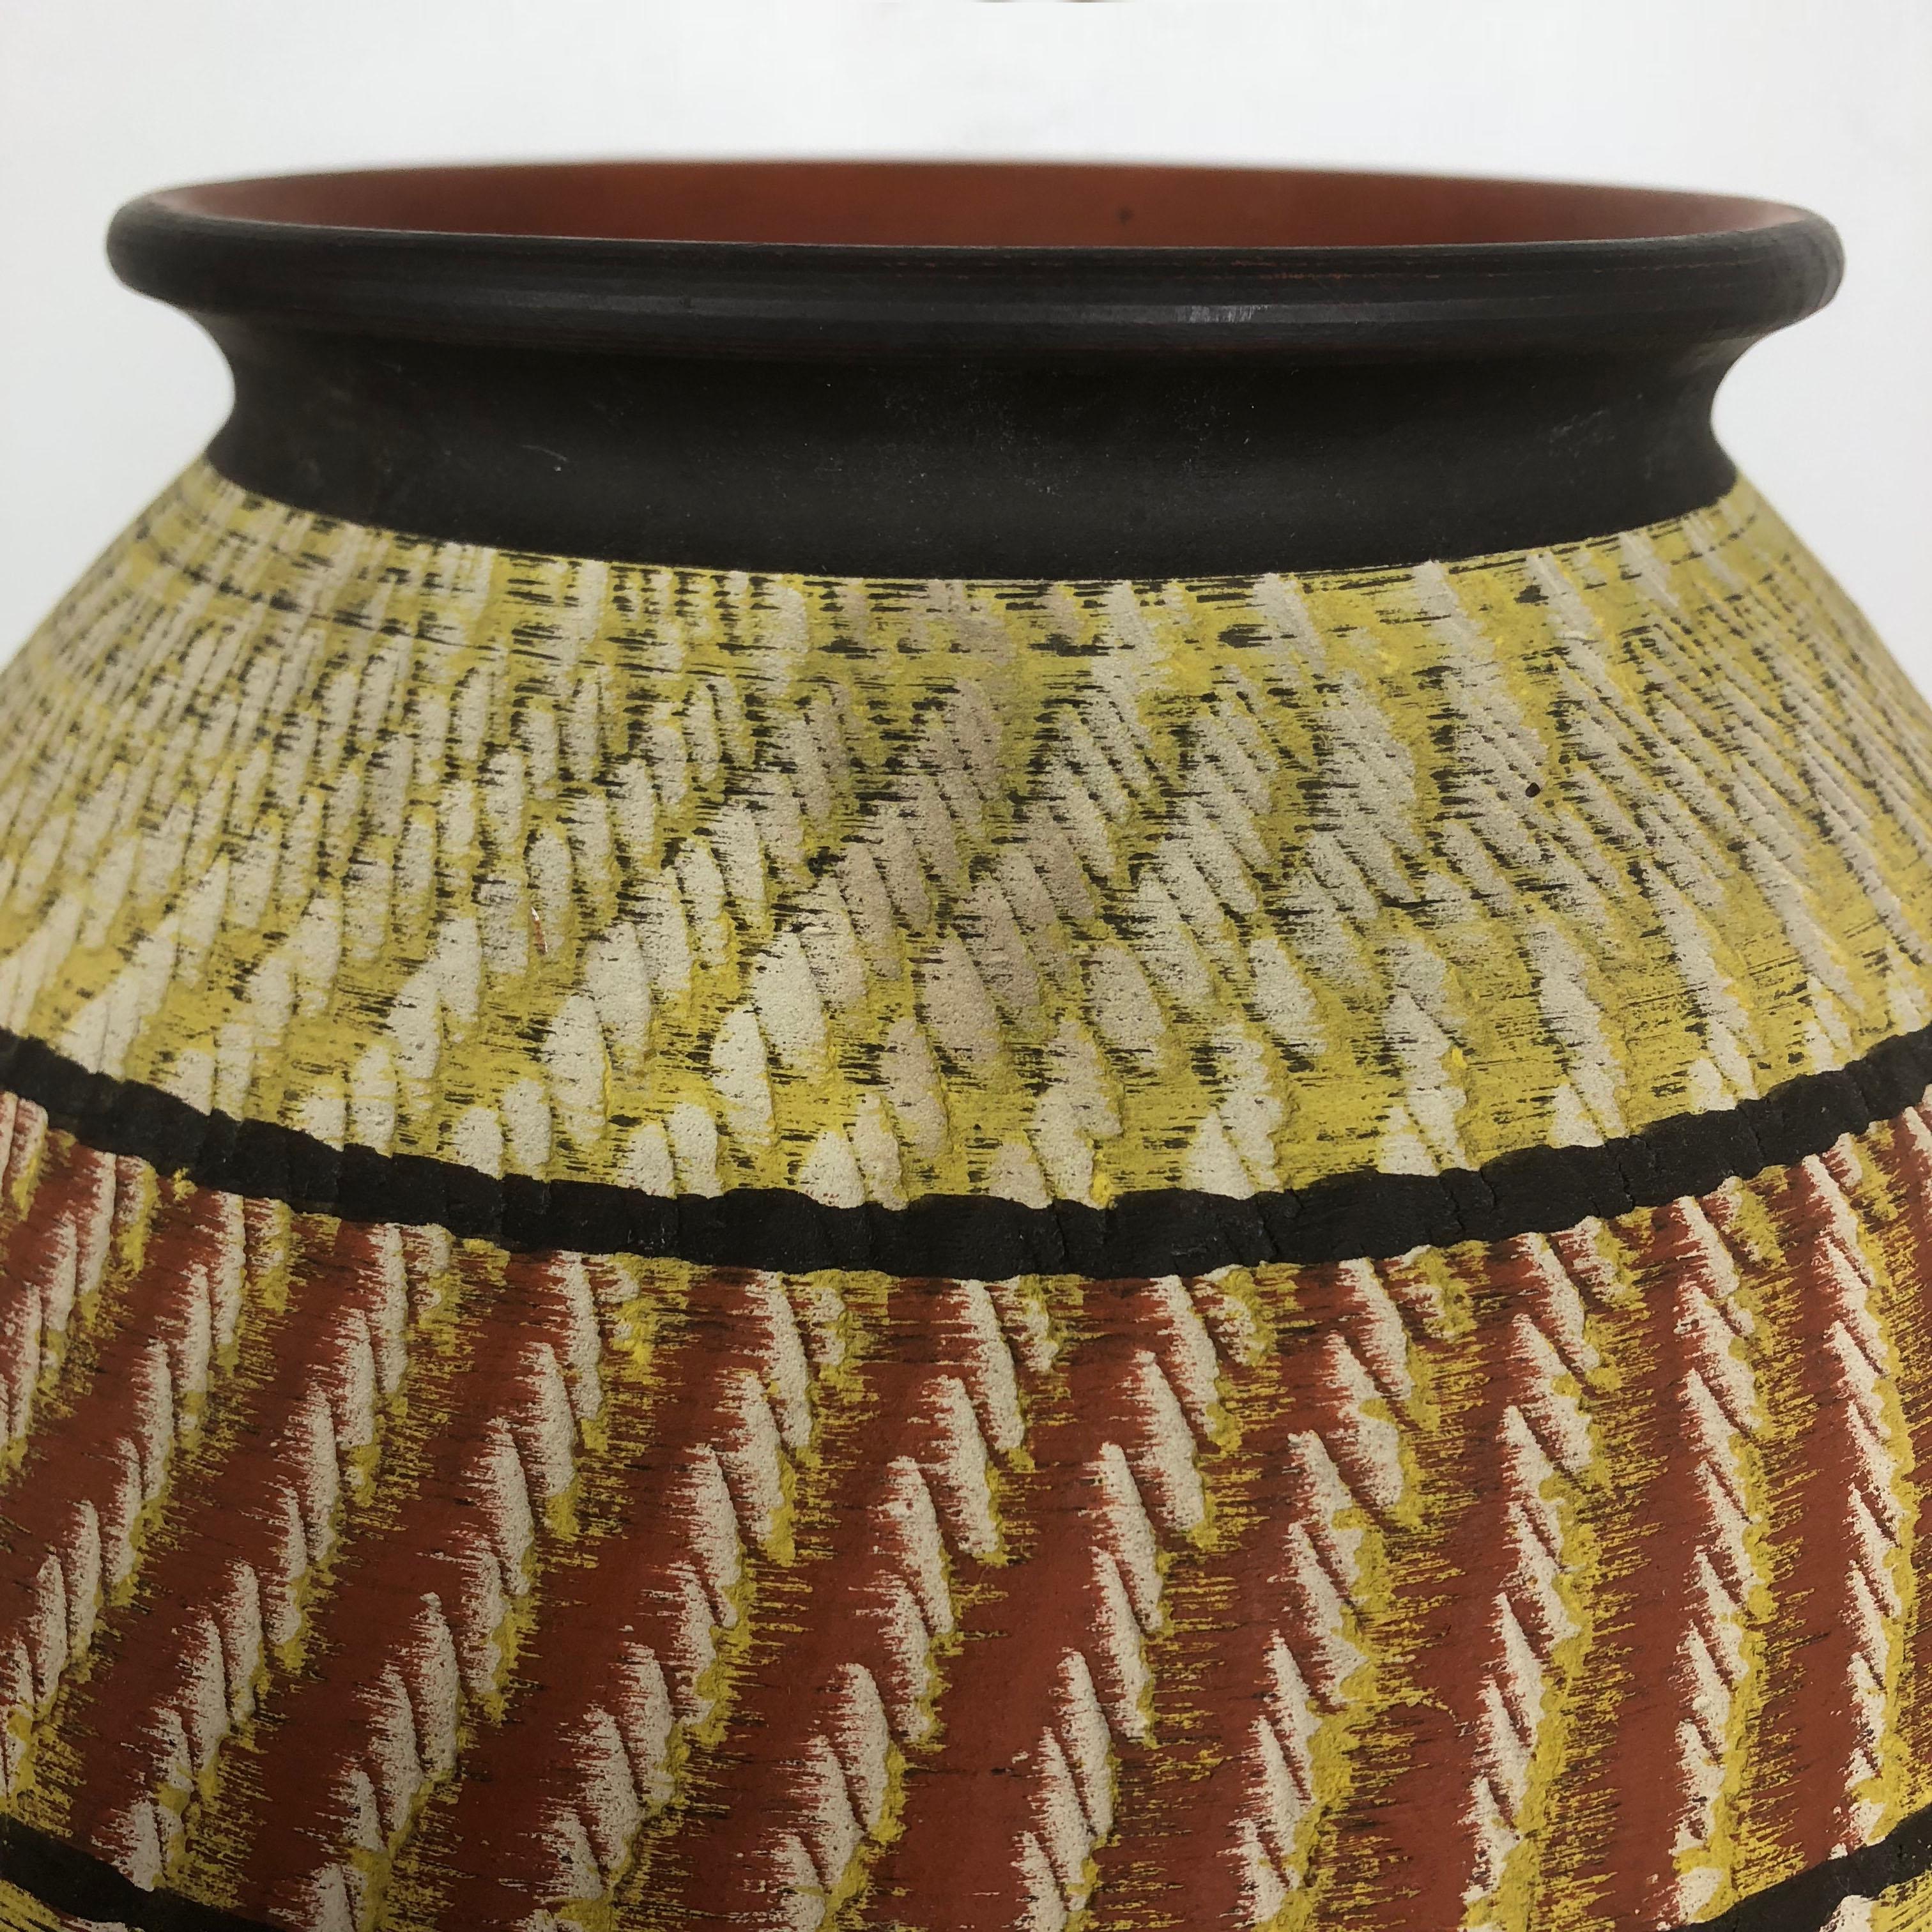 Large abstract Ceramic Pottery Floor Vase by Zöller and Born, Germany, 1950s For Sale 6